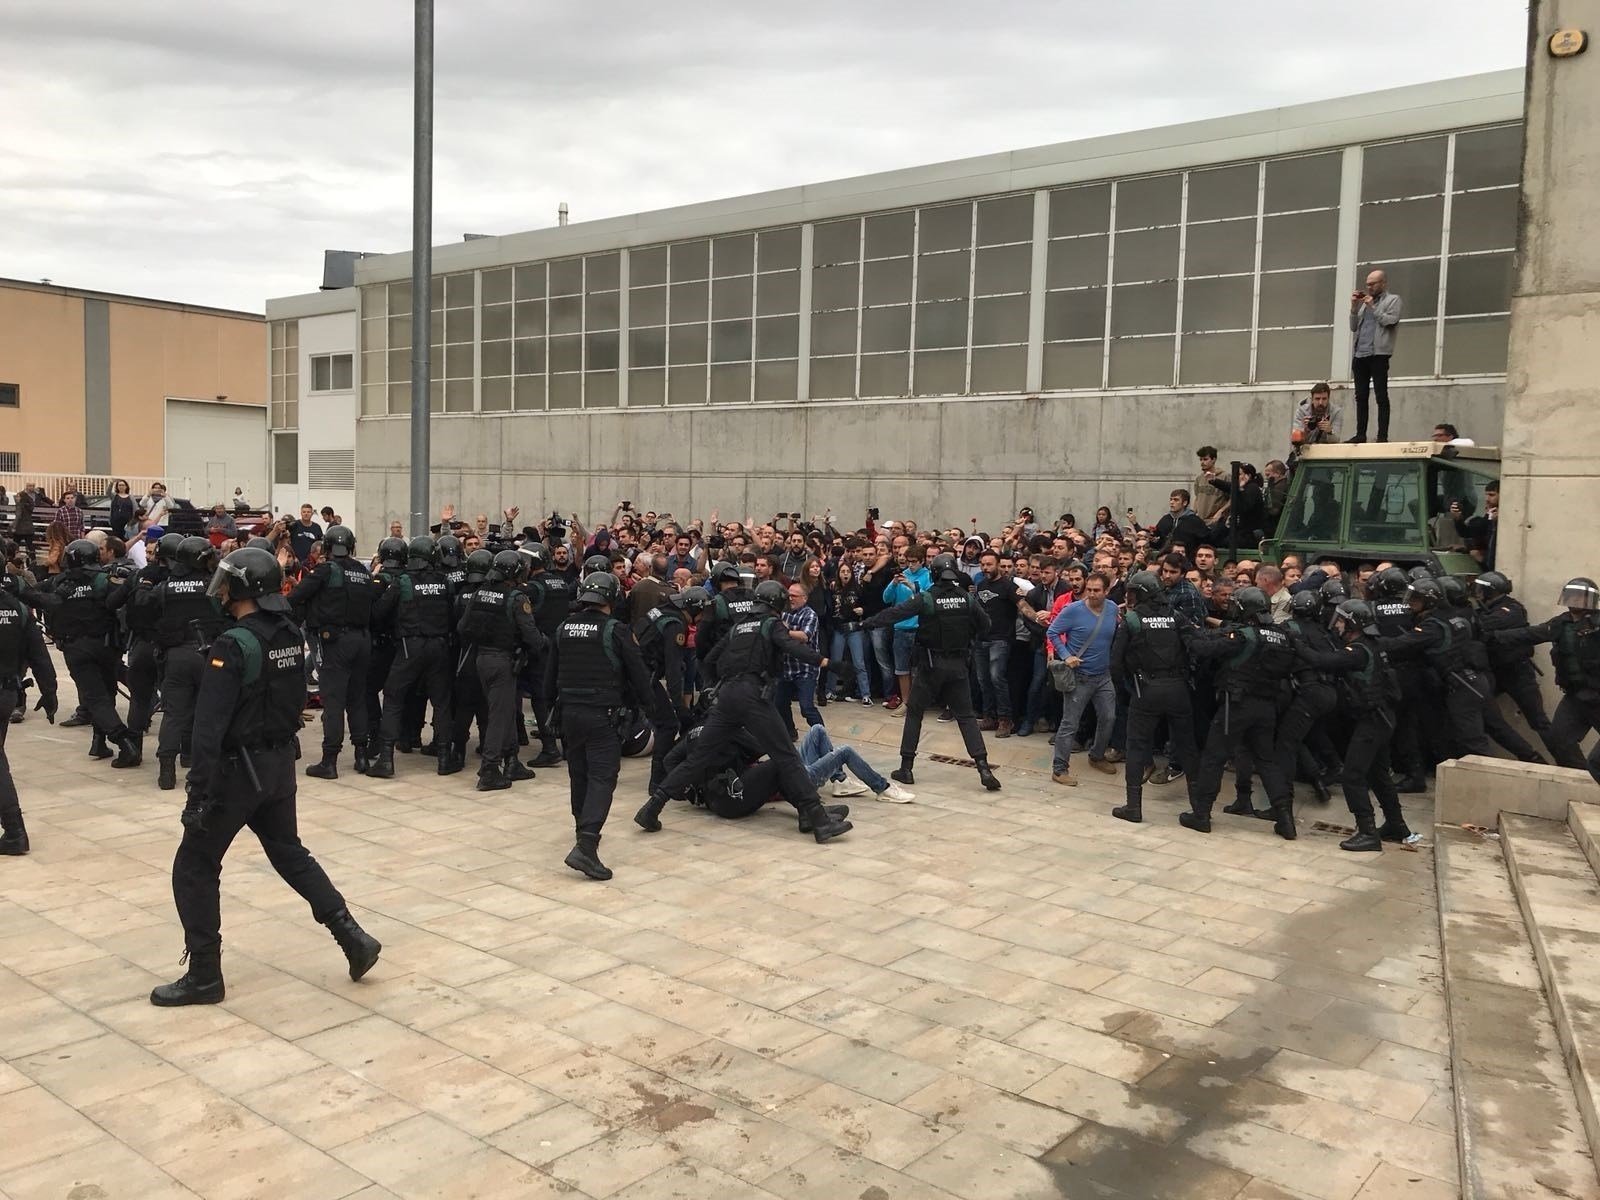 Spain's Civil Guard surround the polling station of Catalan president Puigdemont